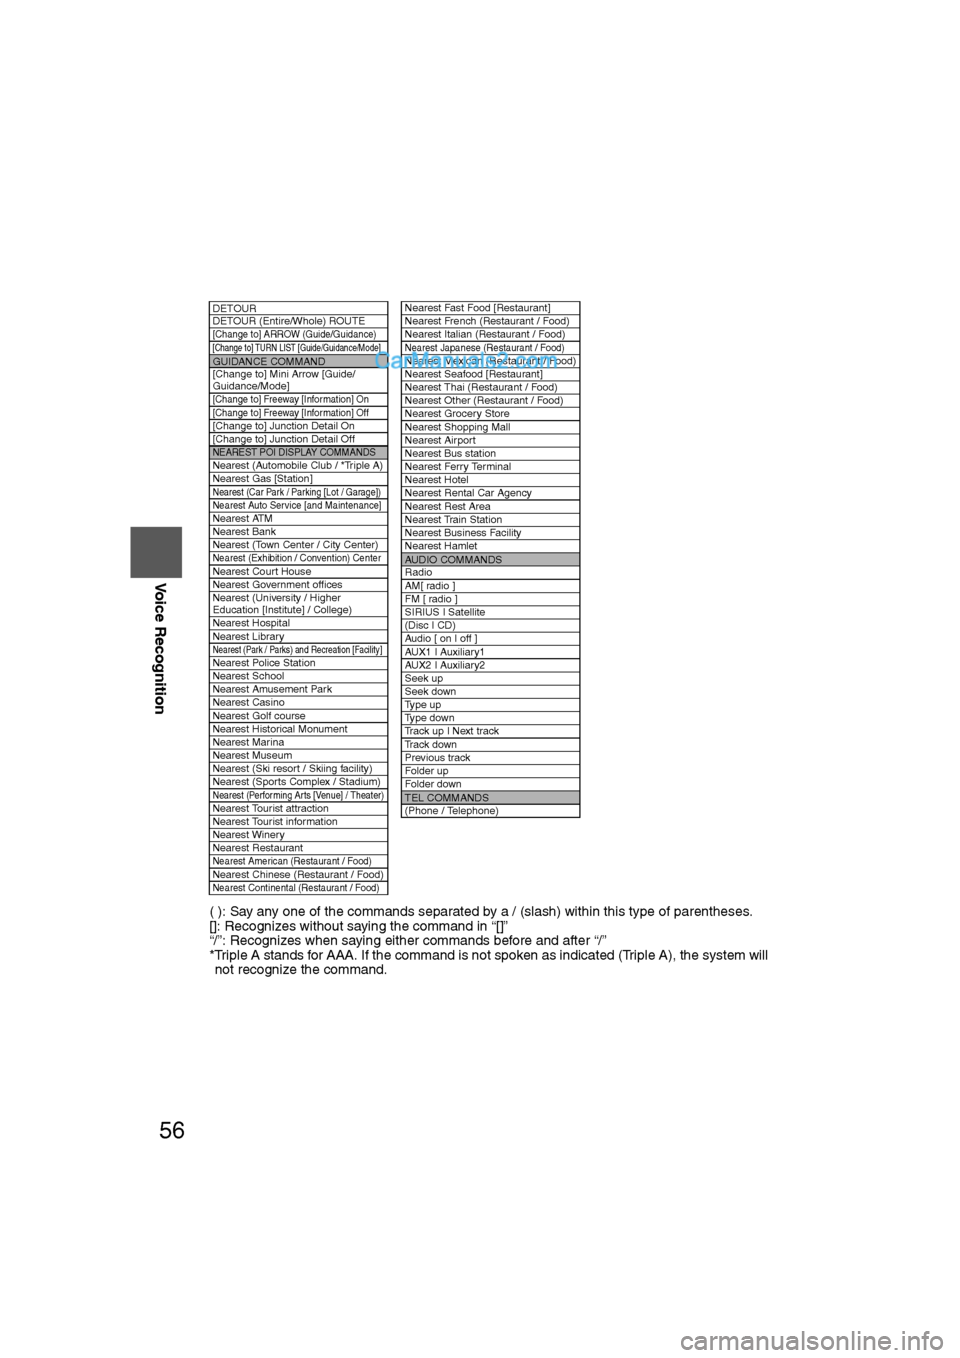 MAZDA MODEL CX-9 2009  Navigation Manual (in English) 56
Before 
UseGetting
started
RoutingAddress 
Book
Voice Recognition
( ): Say any one of the commands separated by a / (slash) within this type of parentheses. 
[]: Recognizes without saying the comma